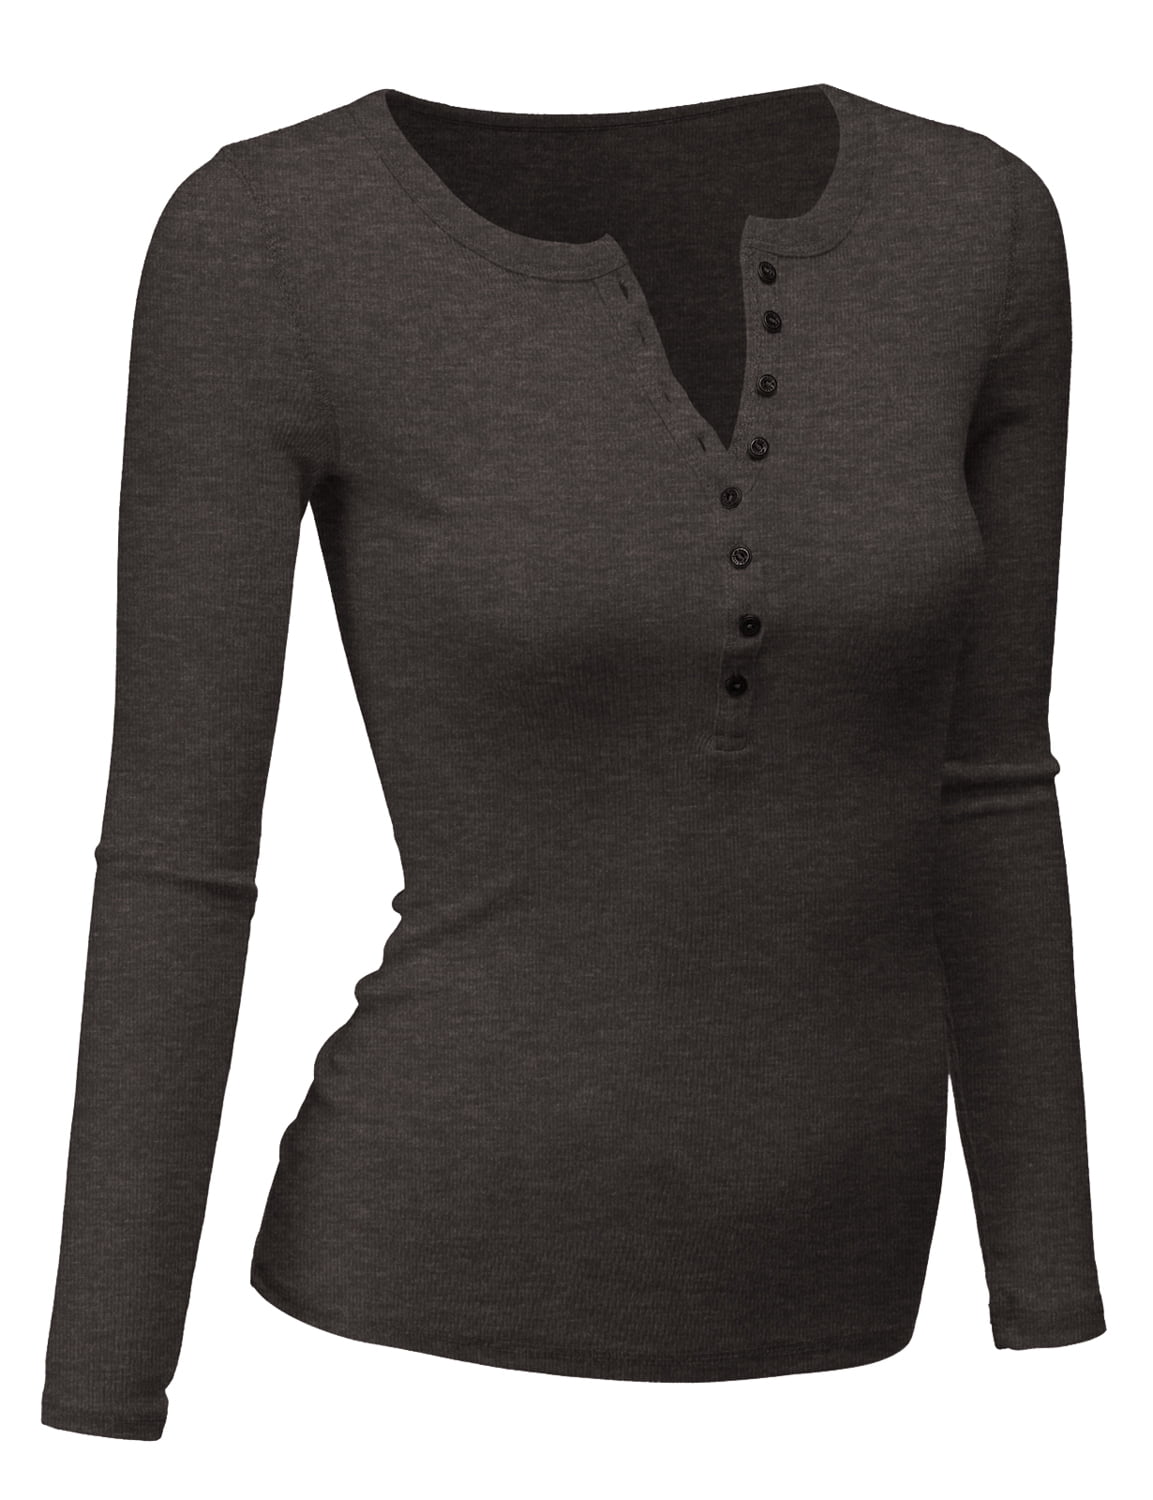 Women's Women Long Sleeve Round Neck Plus Size Henley T-Shirts Thermal Top  CHARCOAL L